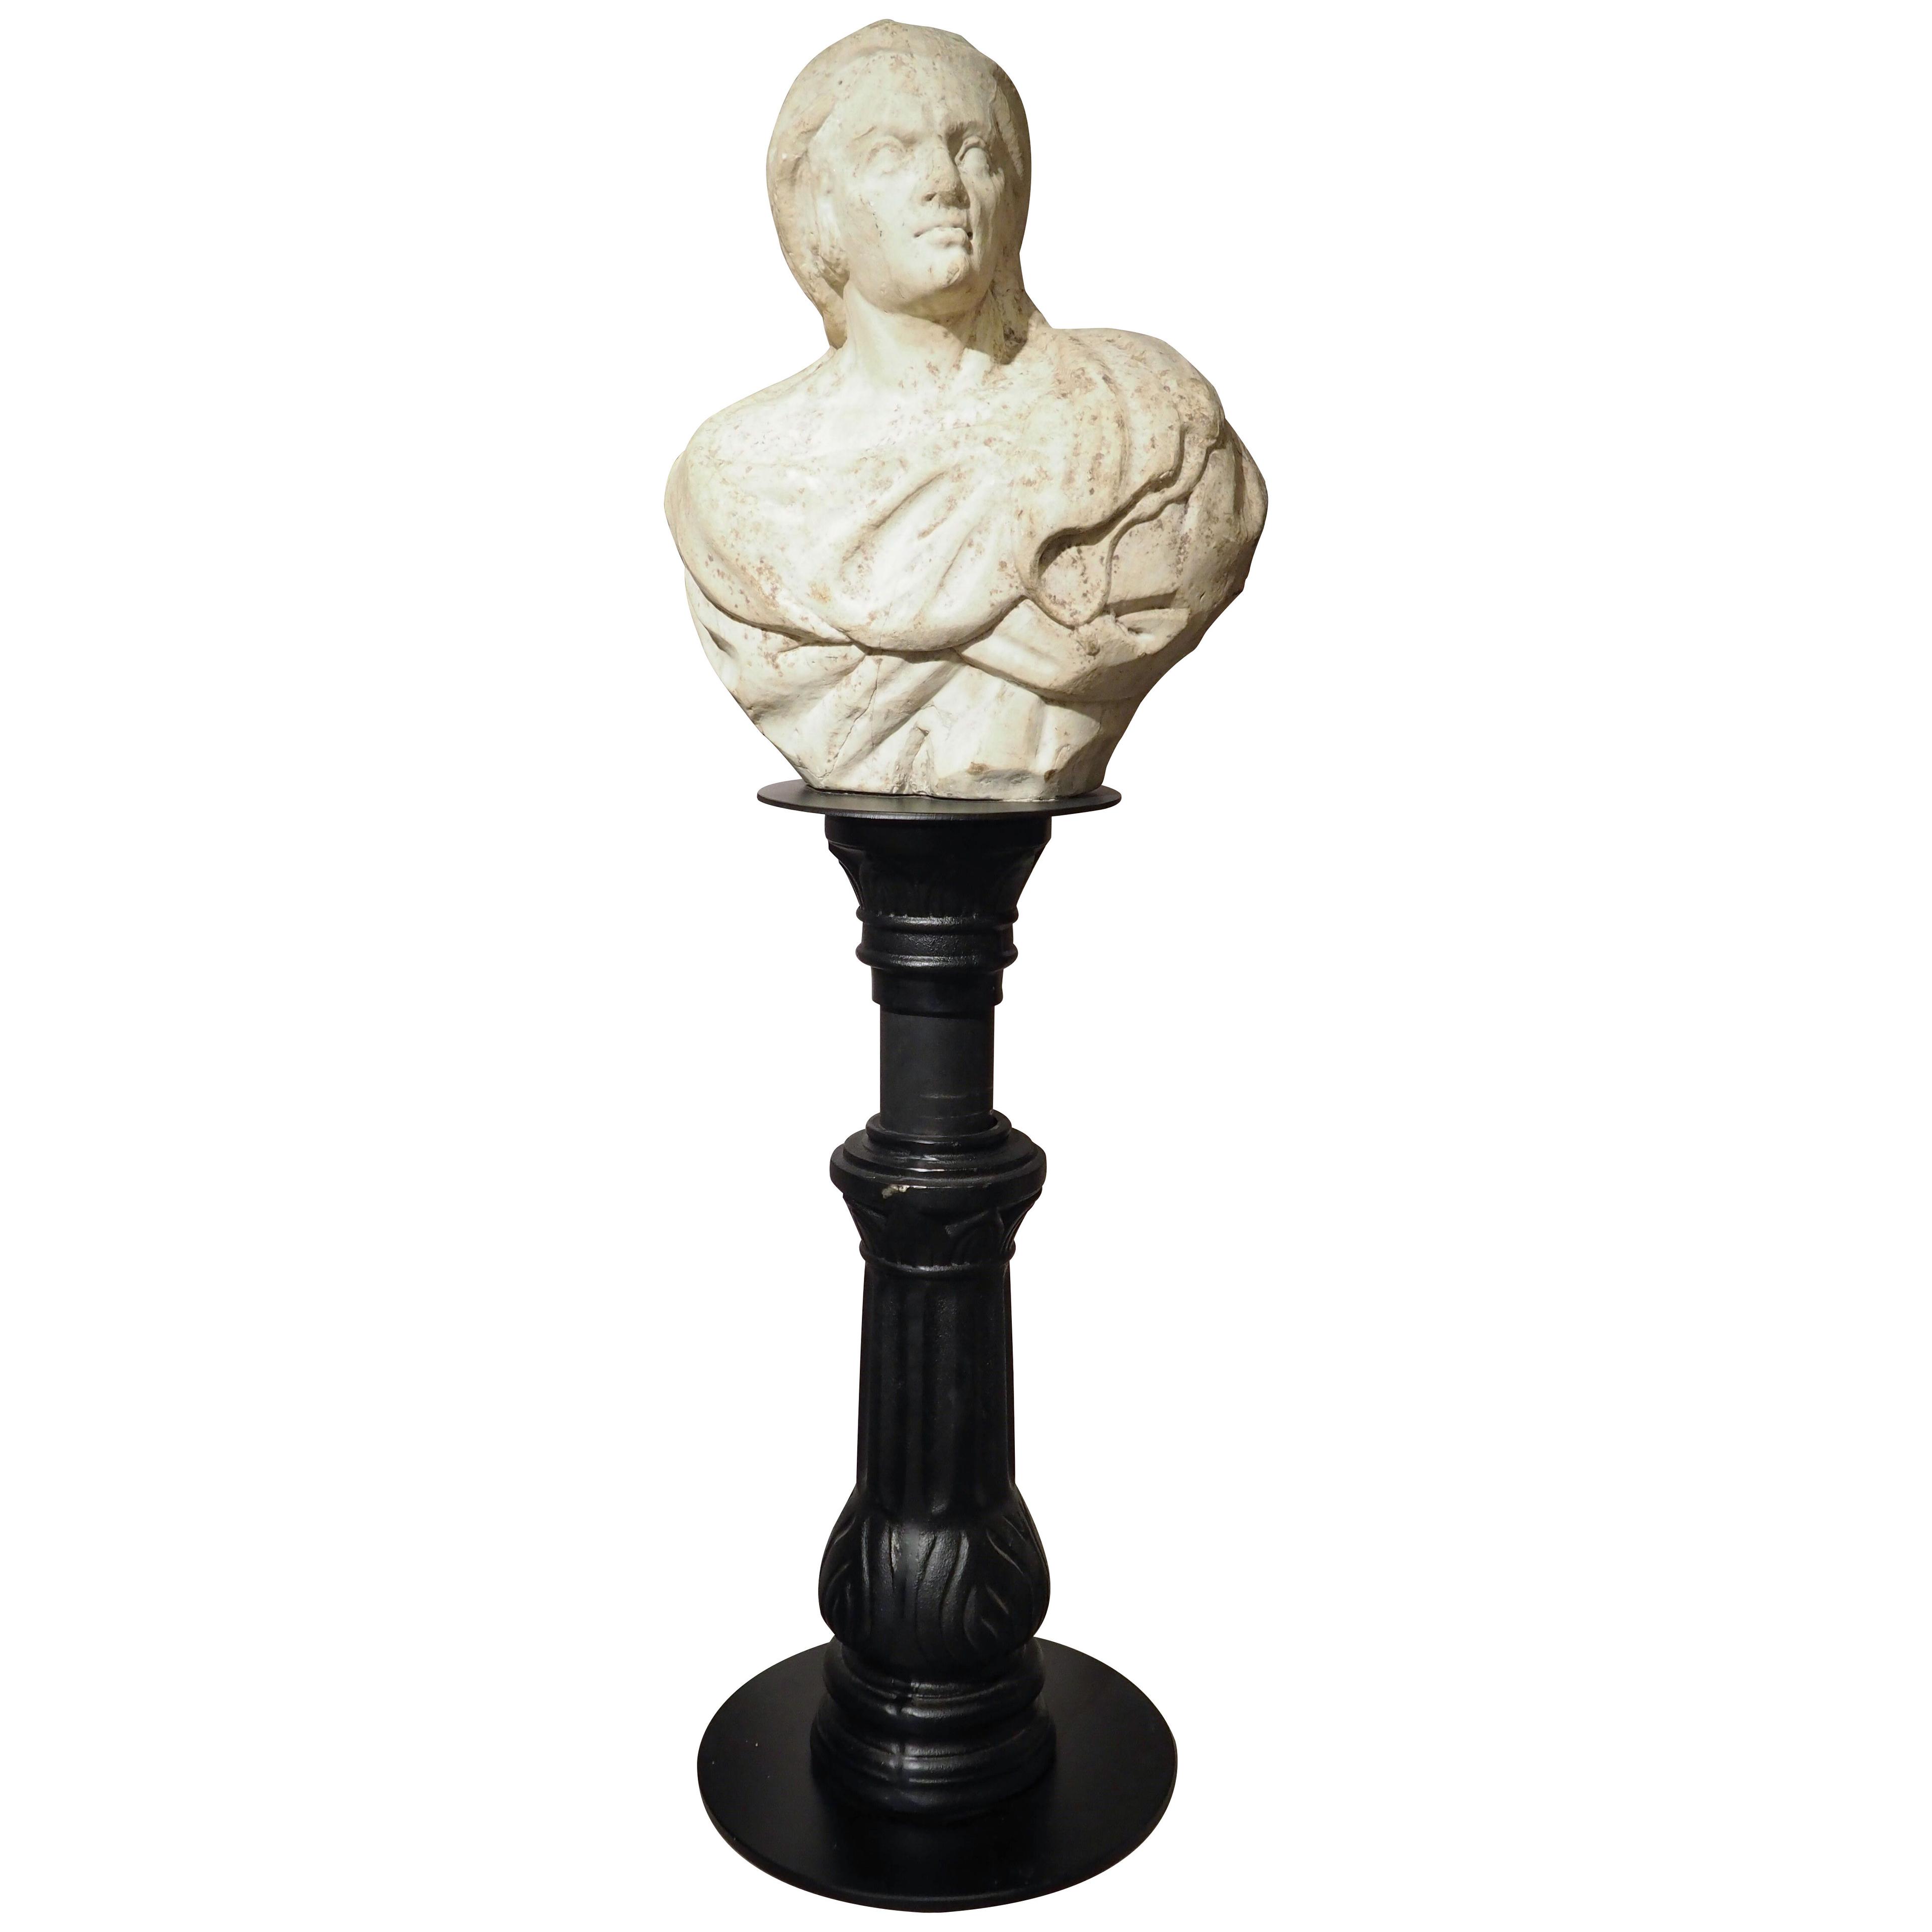 17th Century Italian Carved Marble Bust on Iron Stand from the Amalfi Coast